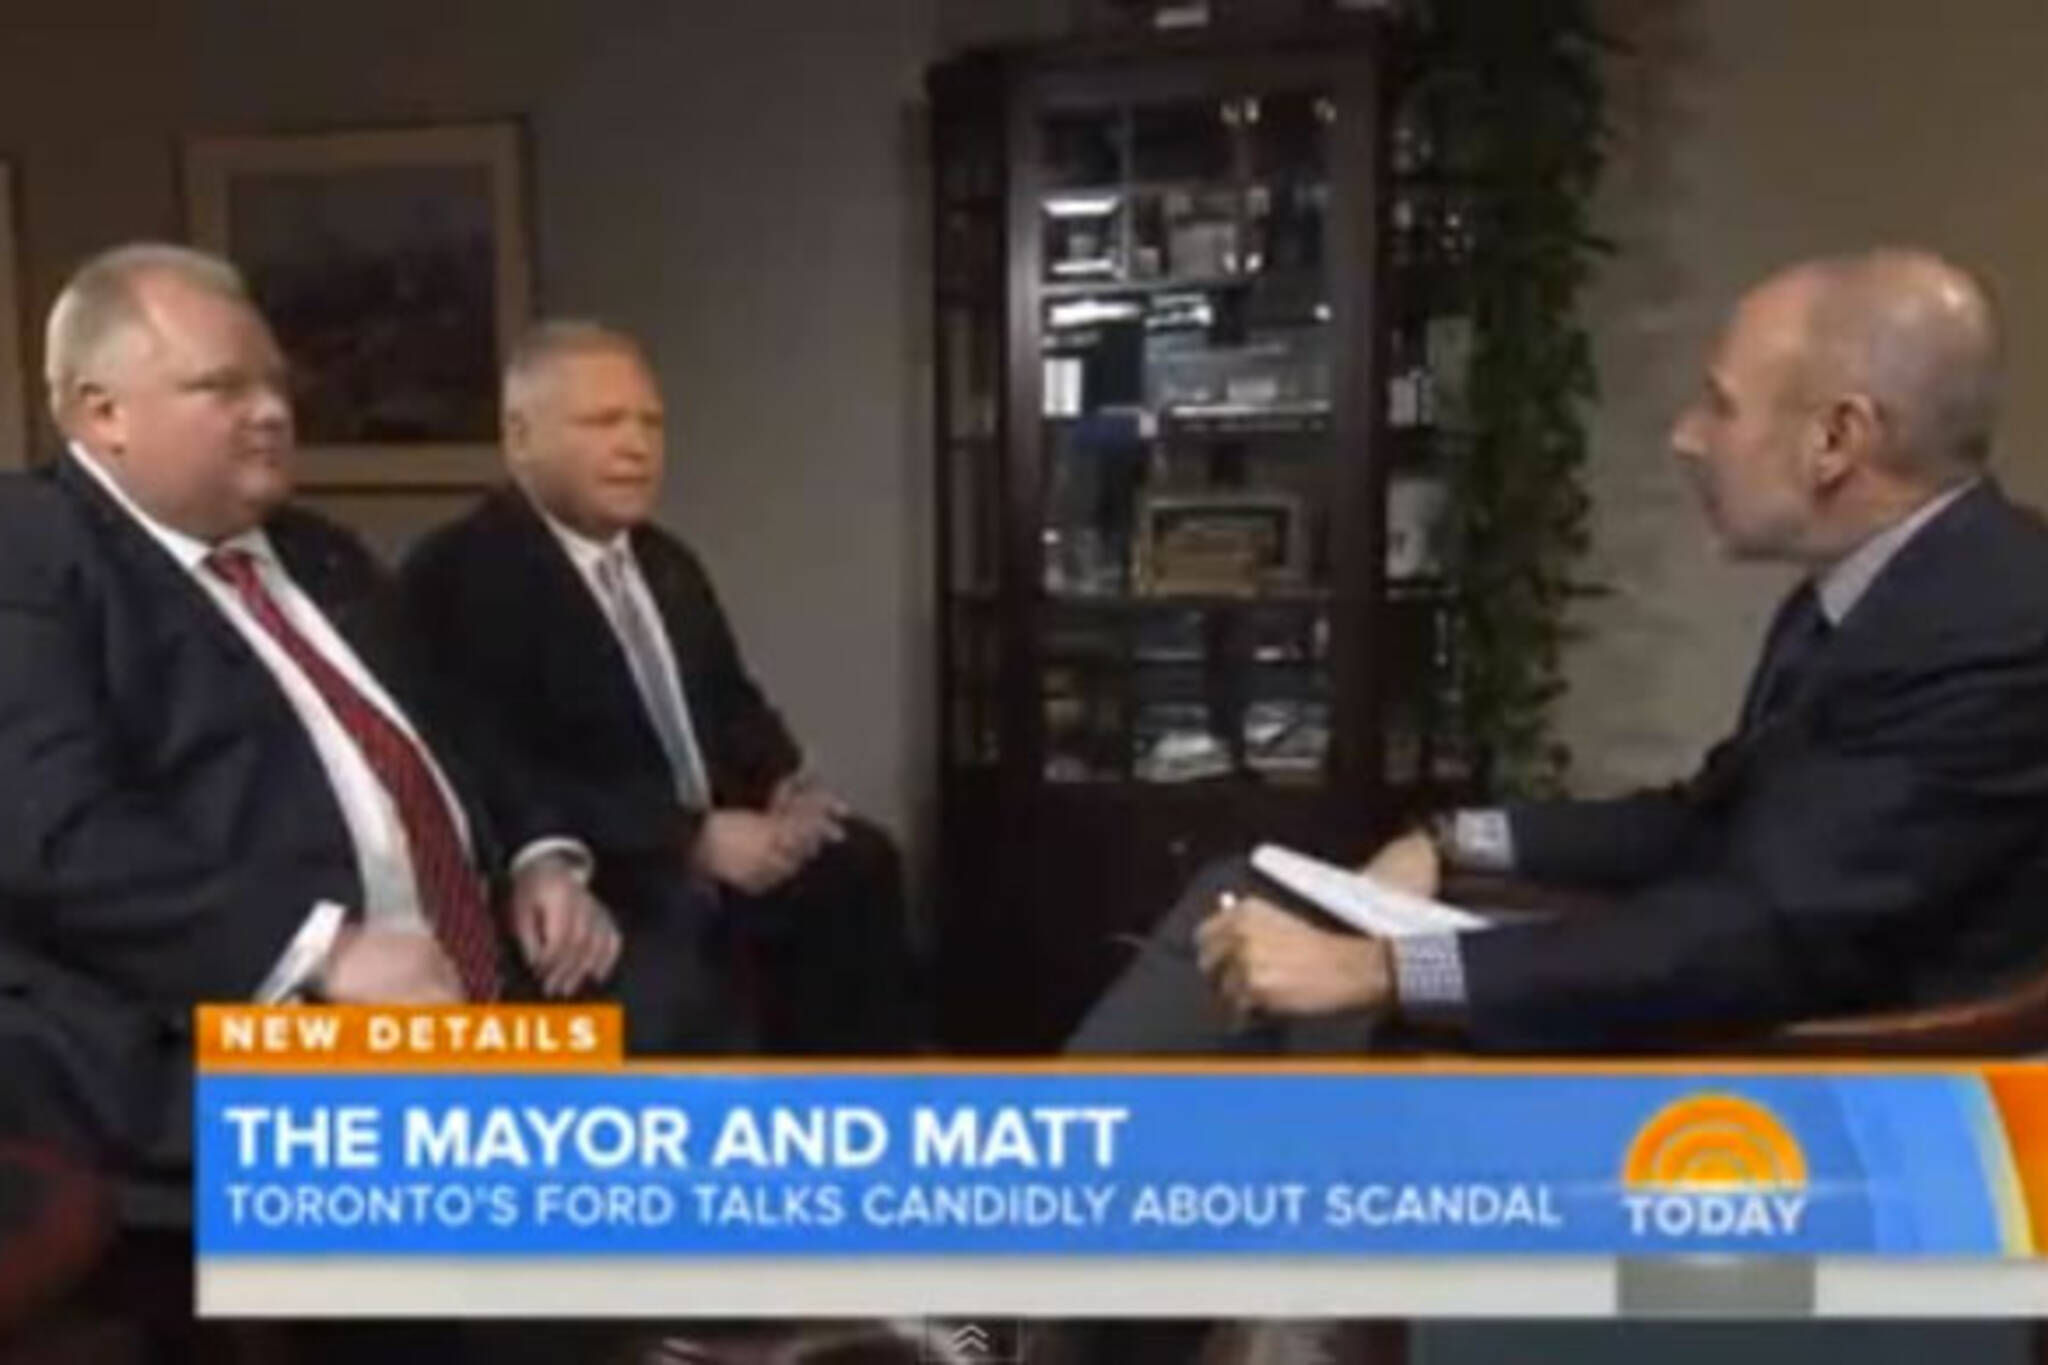 Rob Ford Today Show